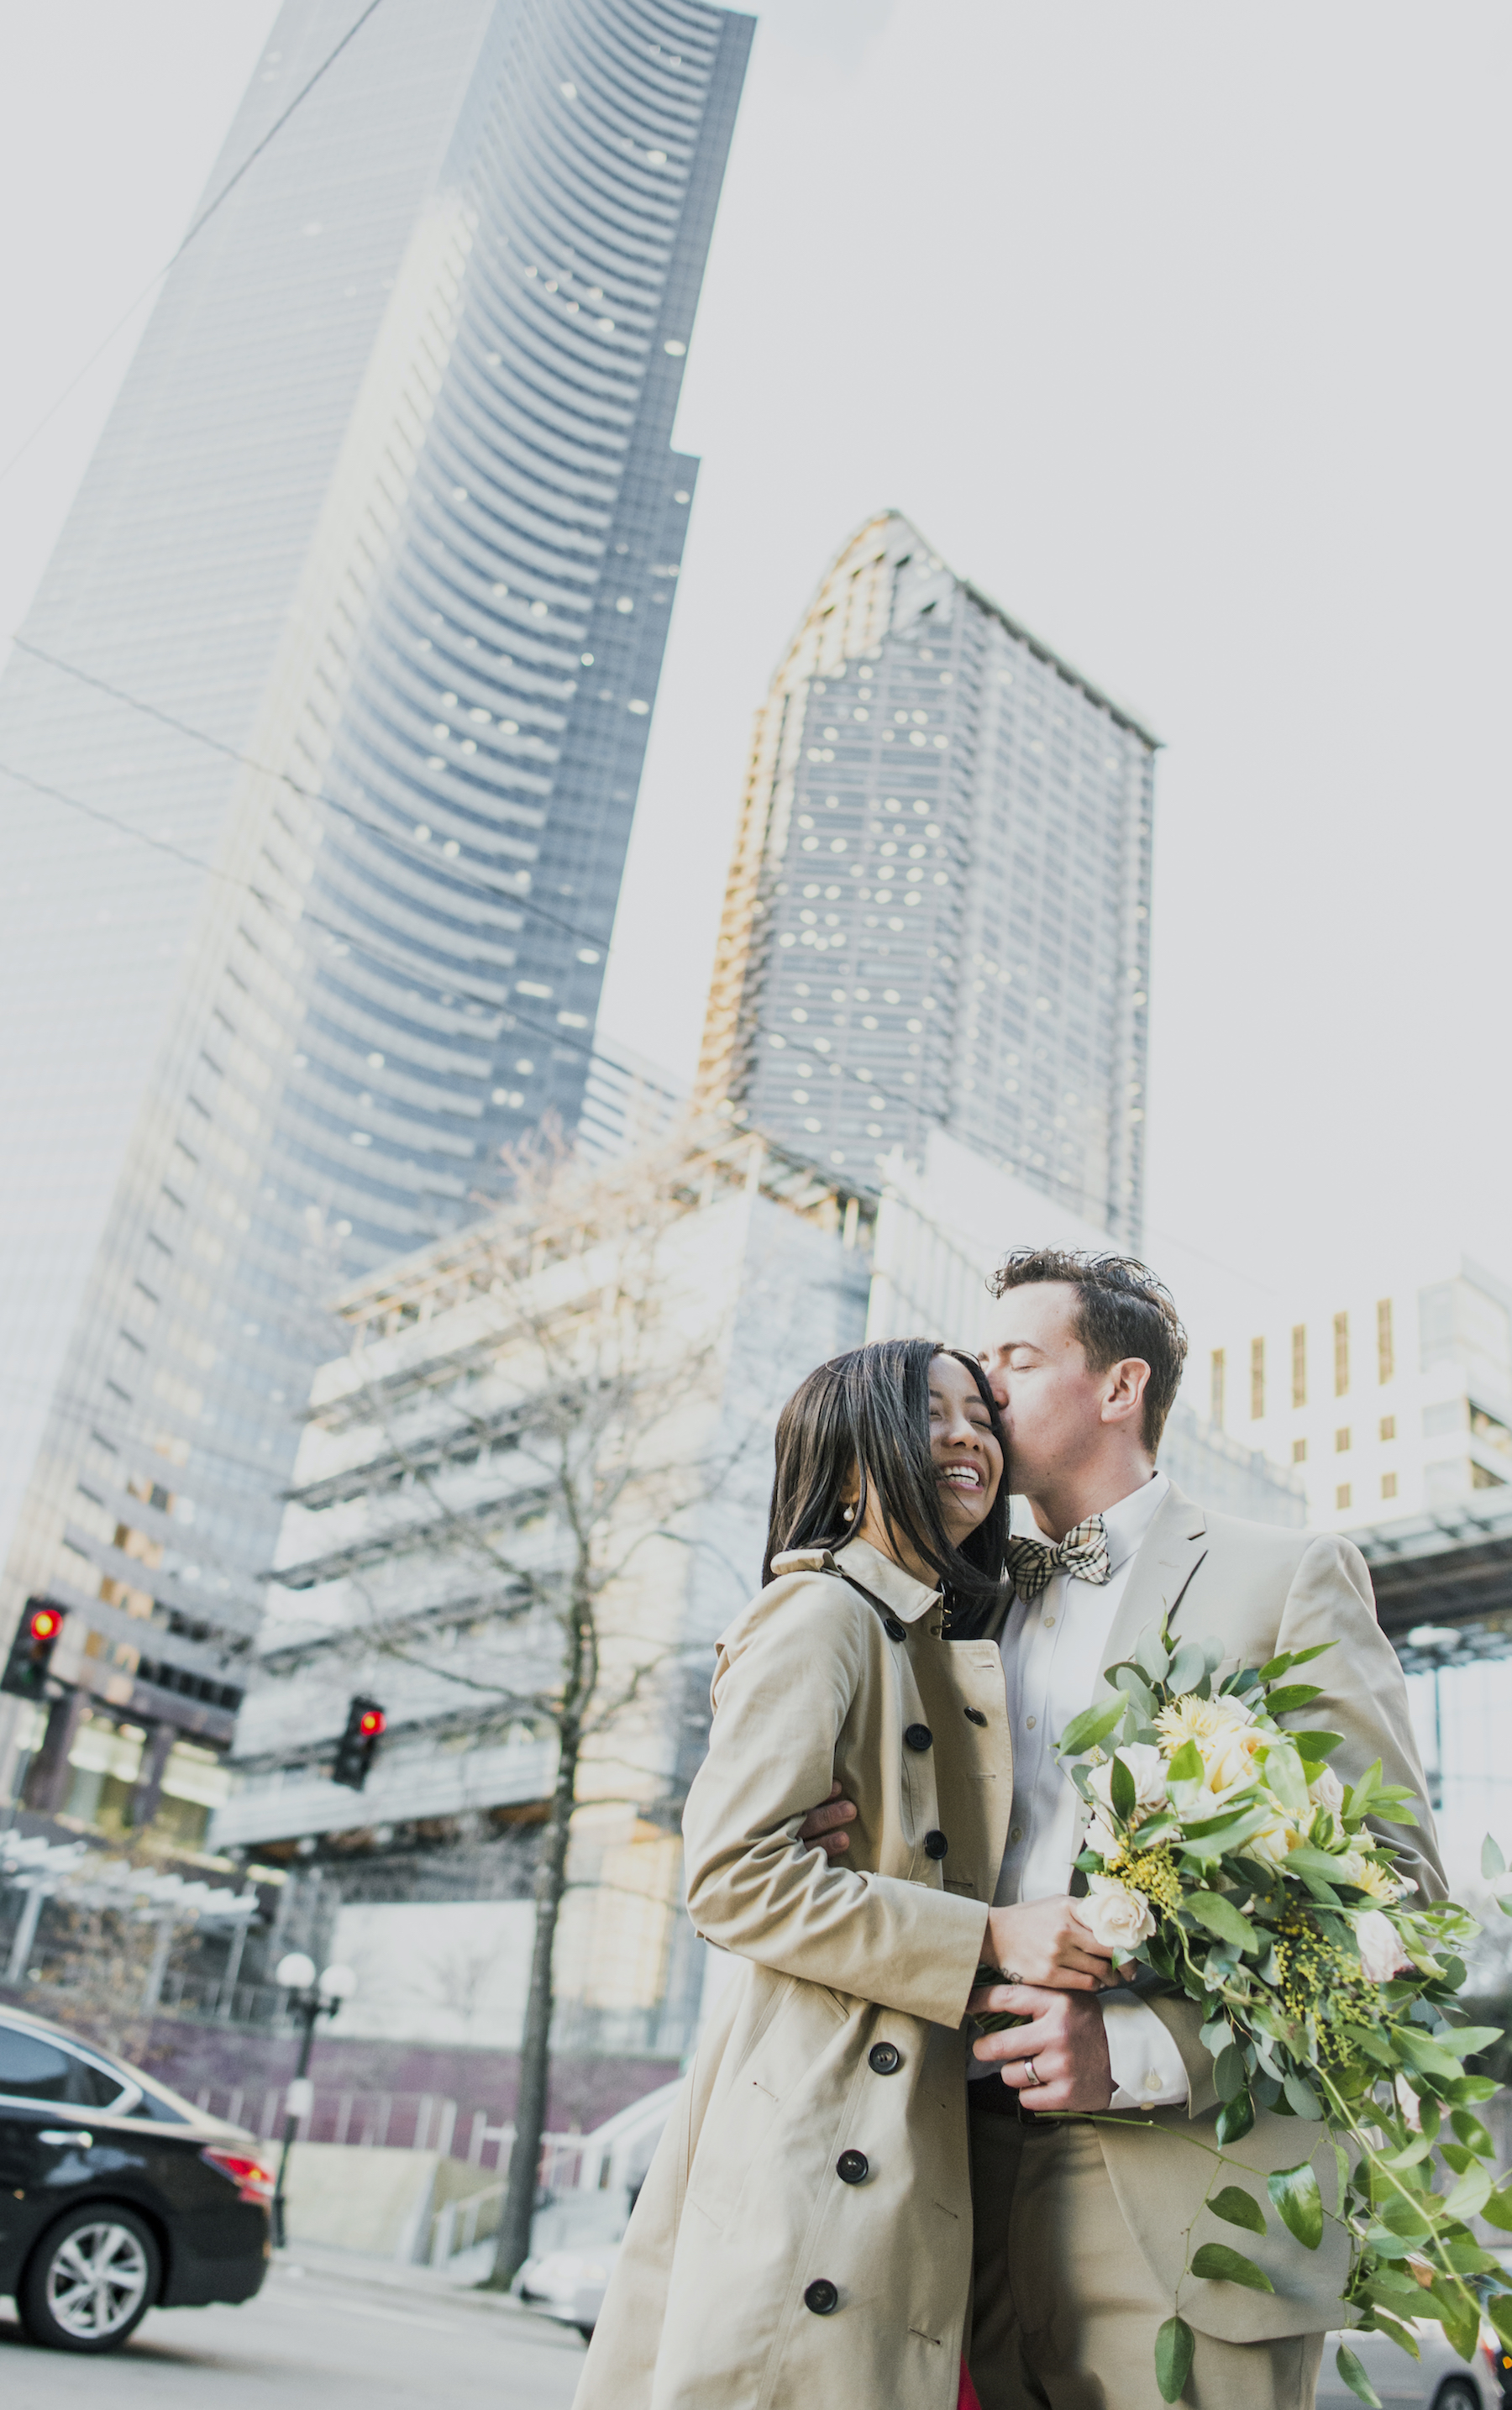 add-newphotography_by_jane_speleers_2017_seattle_court_house_wedding-dsc_9287-2